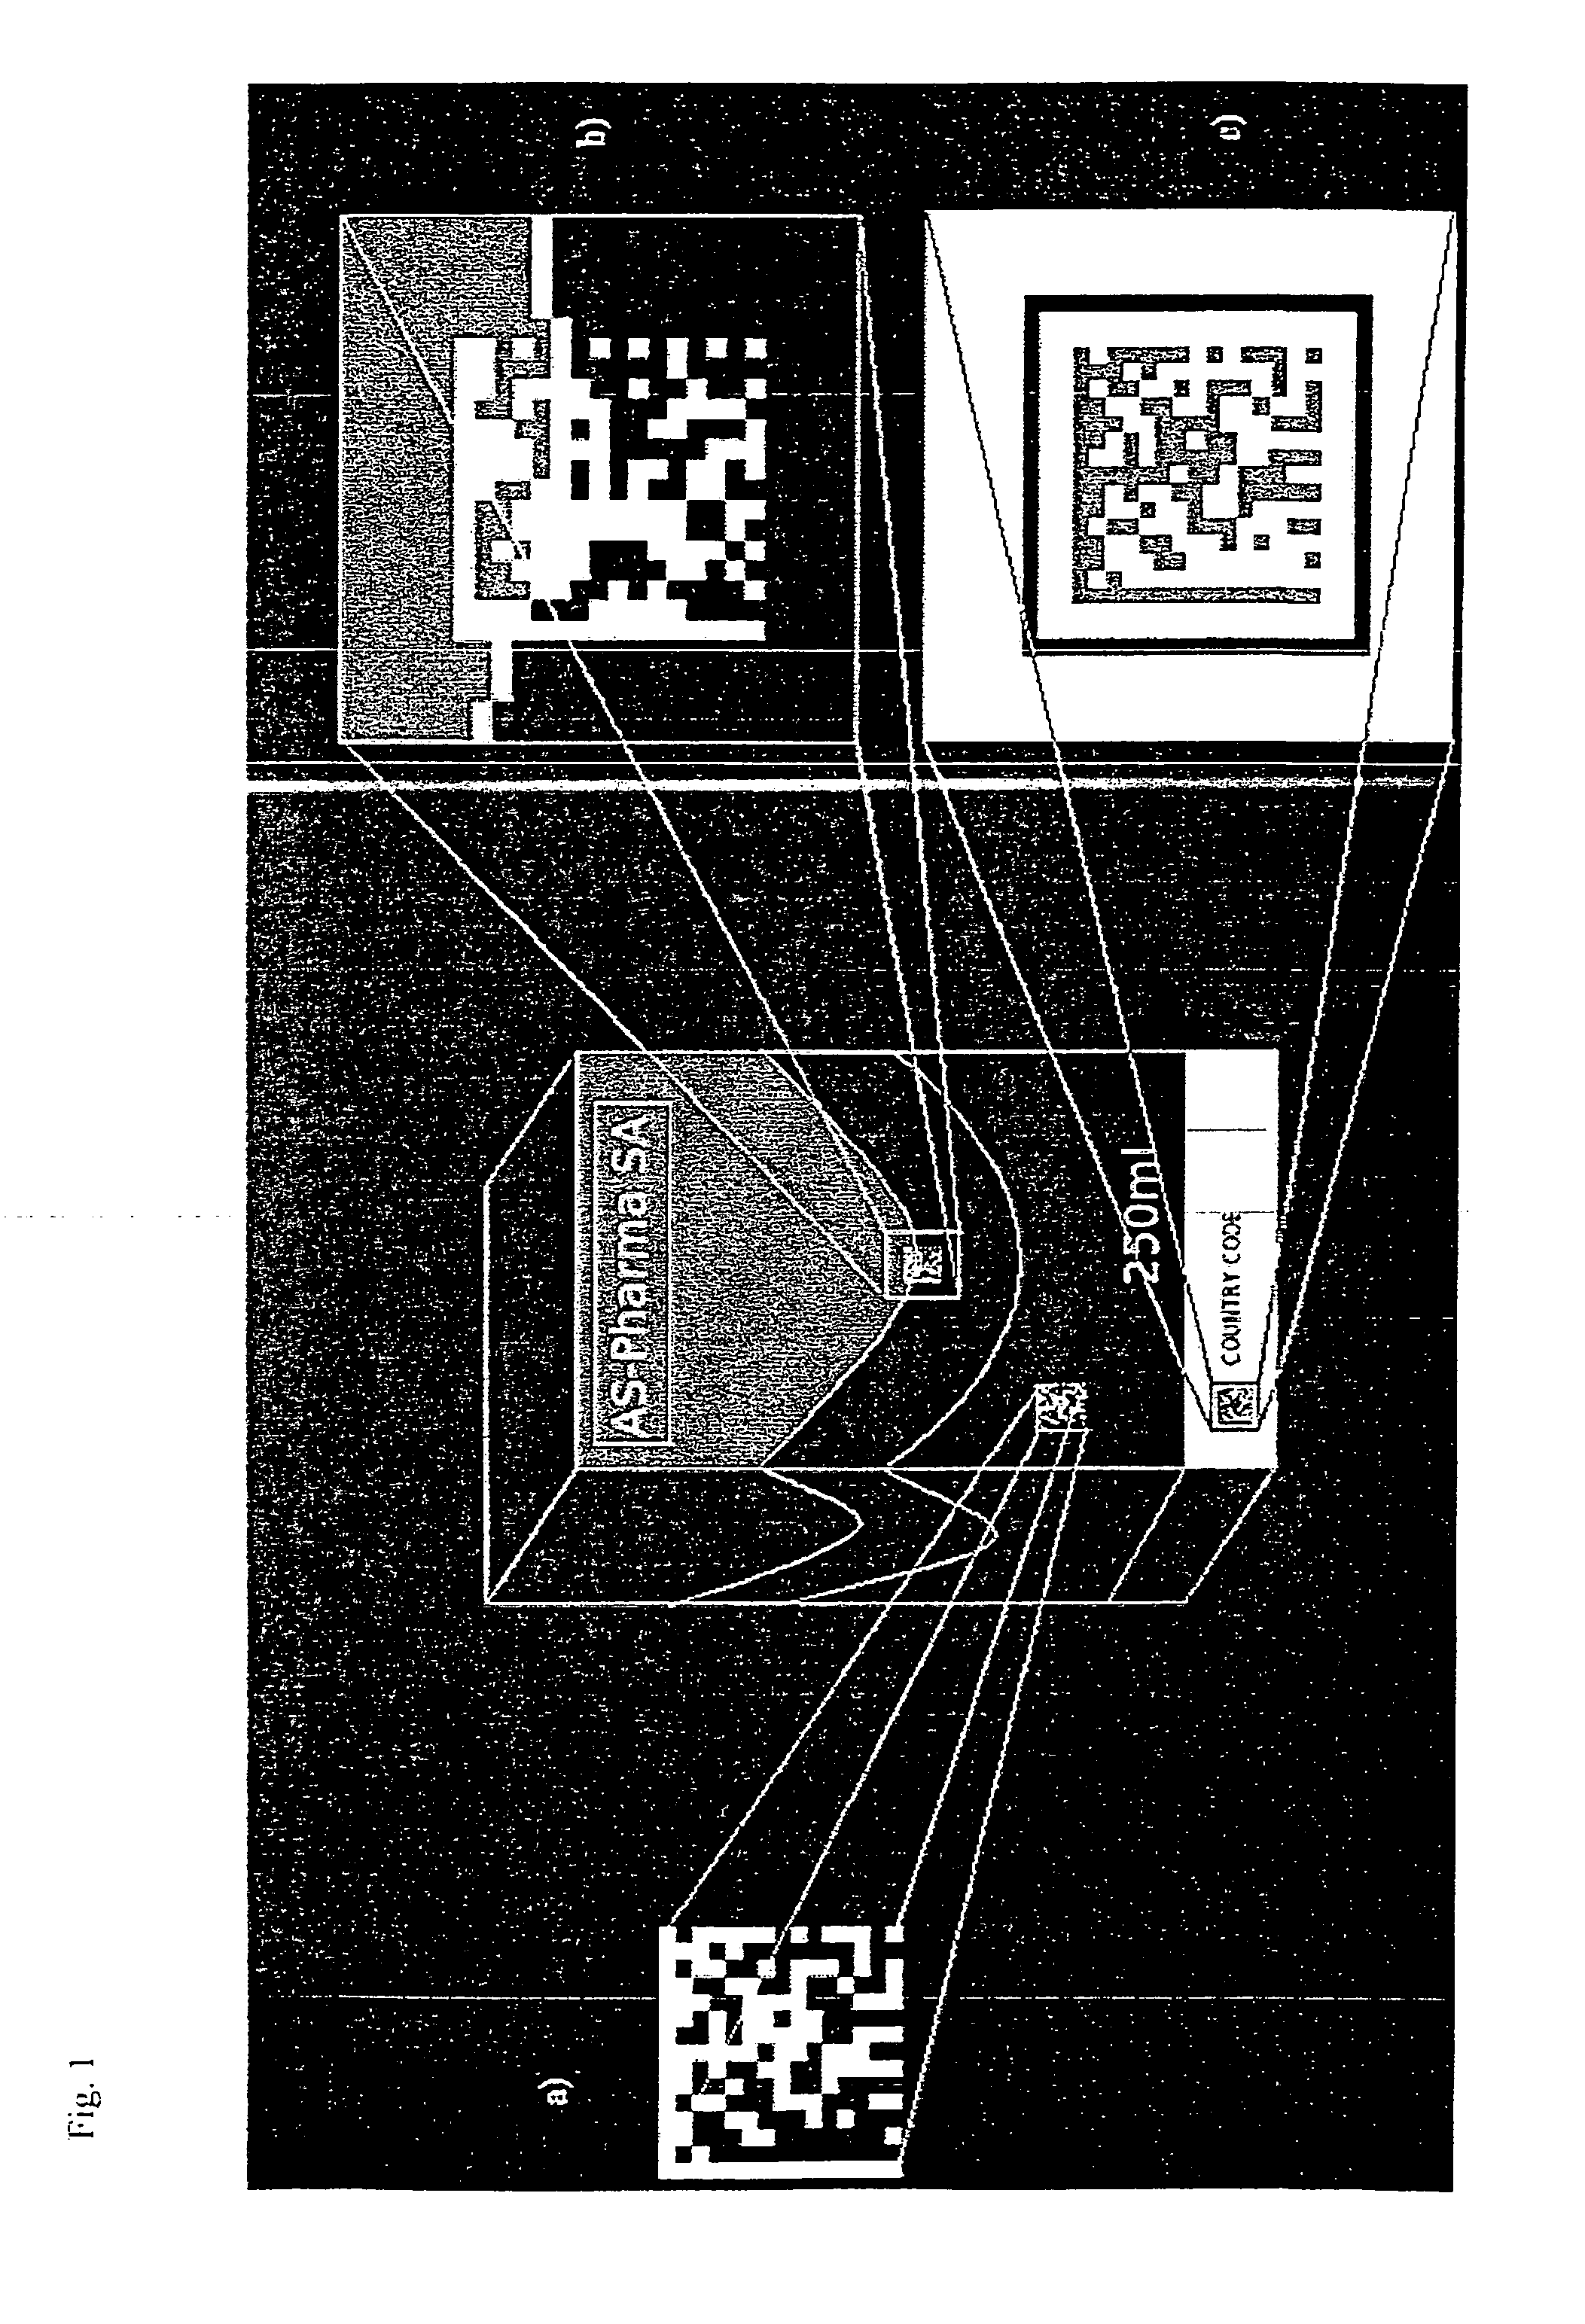 Identification and authentication using liquid crystal material markings